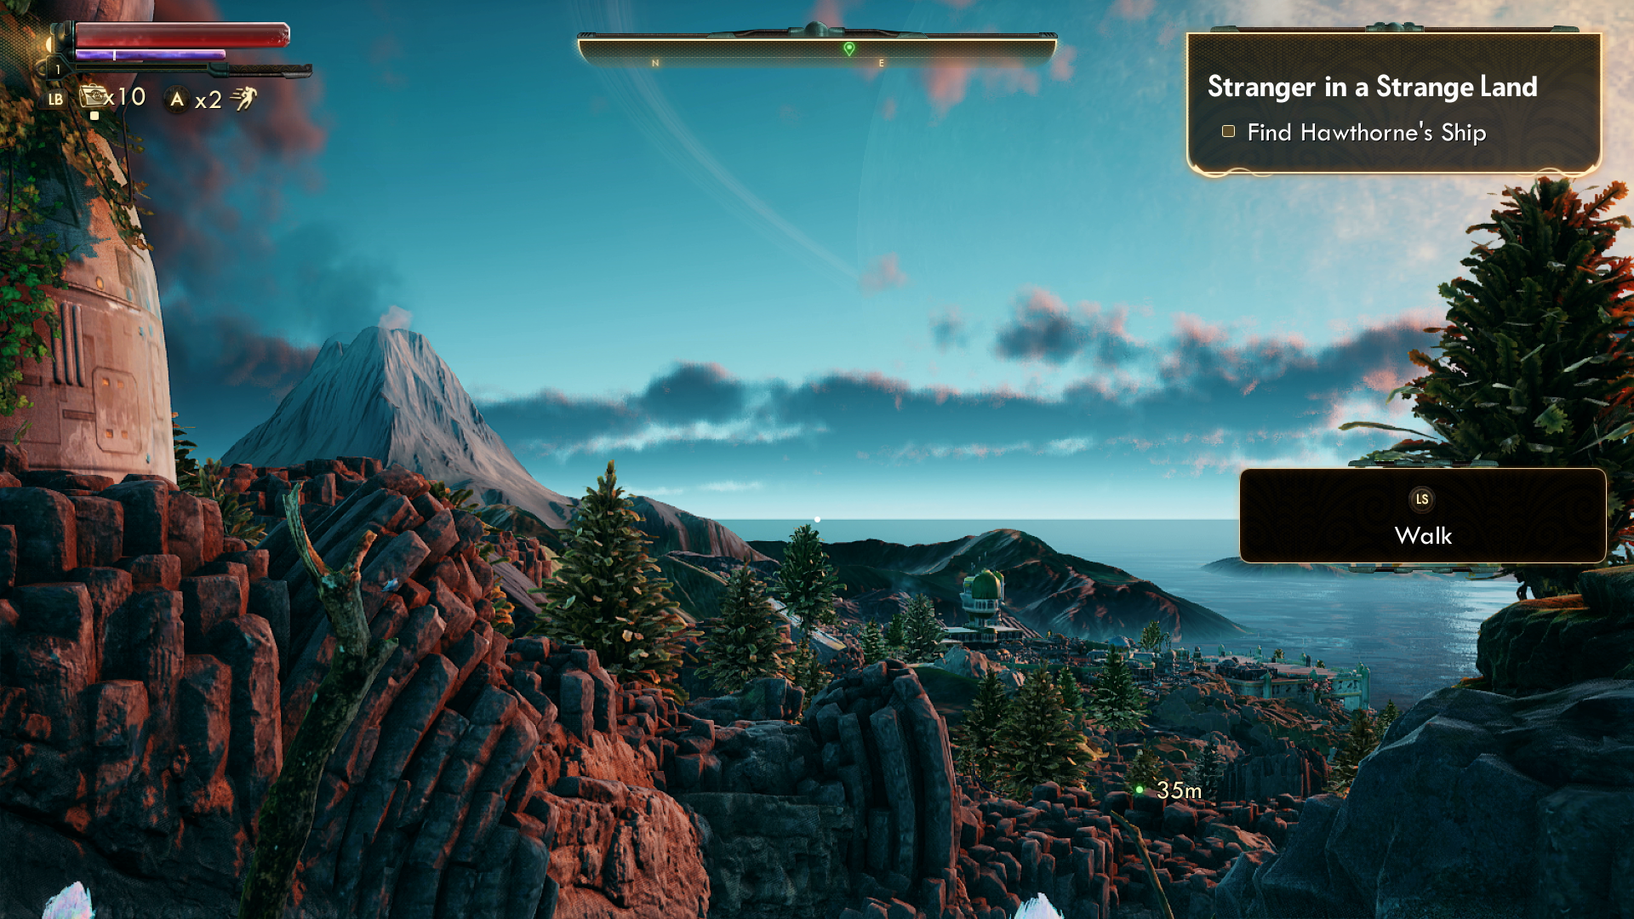 Player exploring an island in the game The Outer Worlds. The health bar, navigation bar, quest objective, and subtitles all have strong contrast against the dark background, making them more visible for the player.